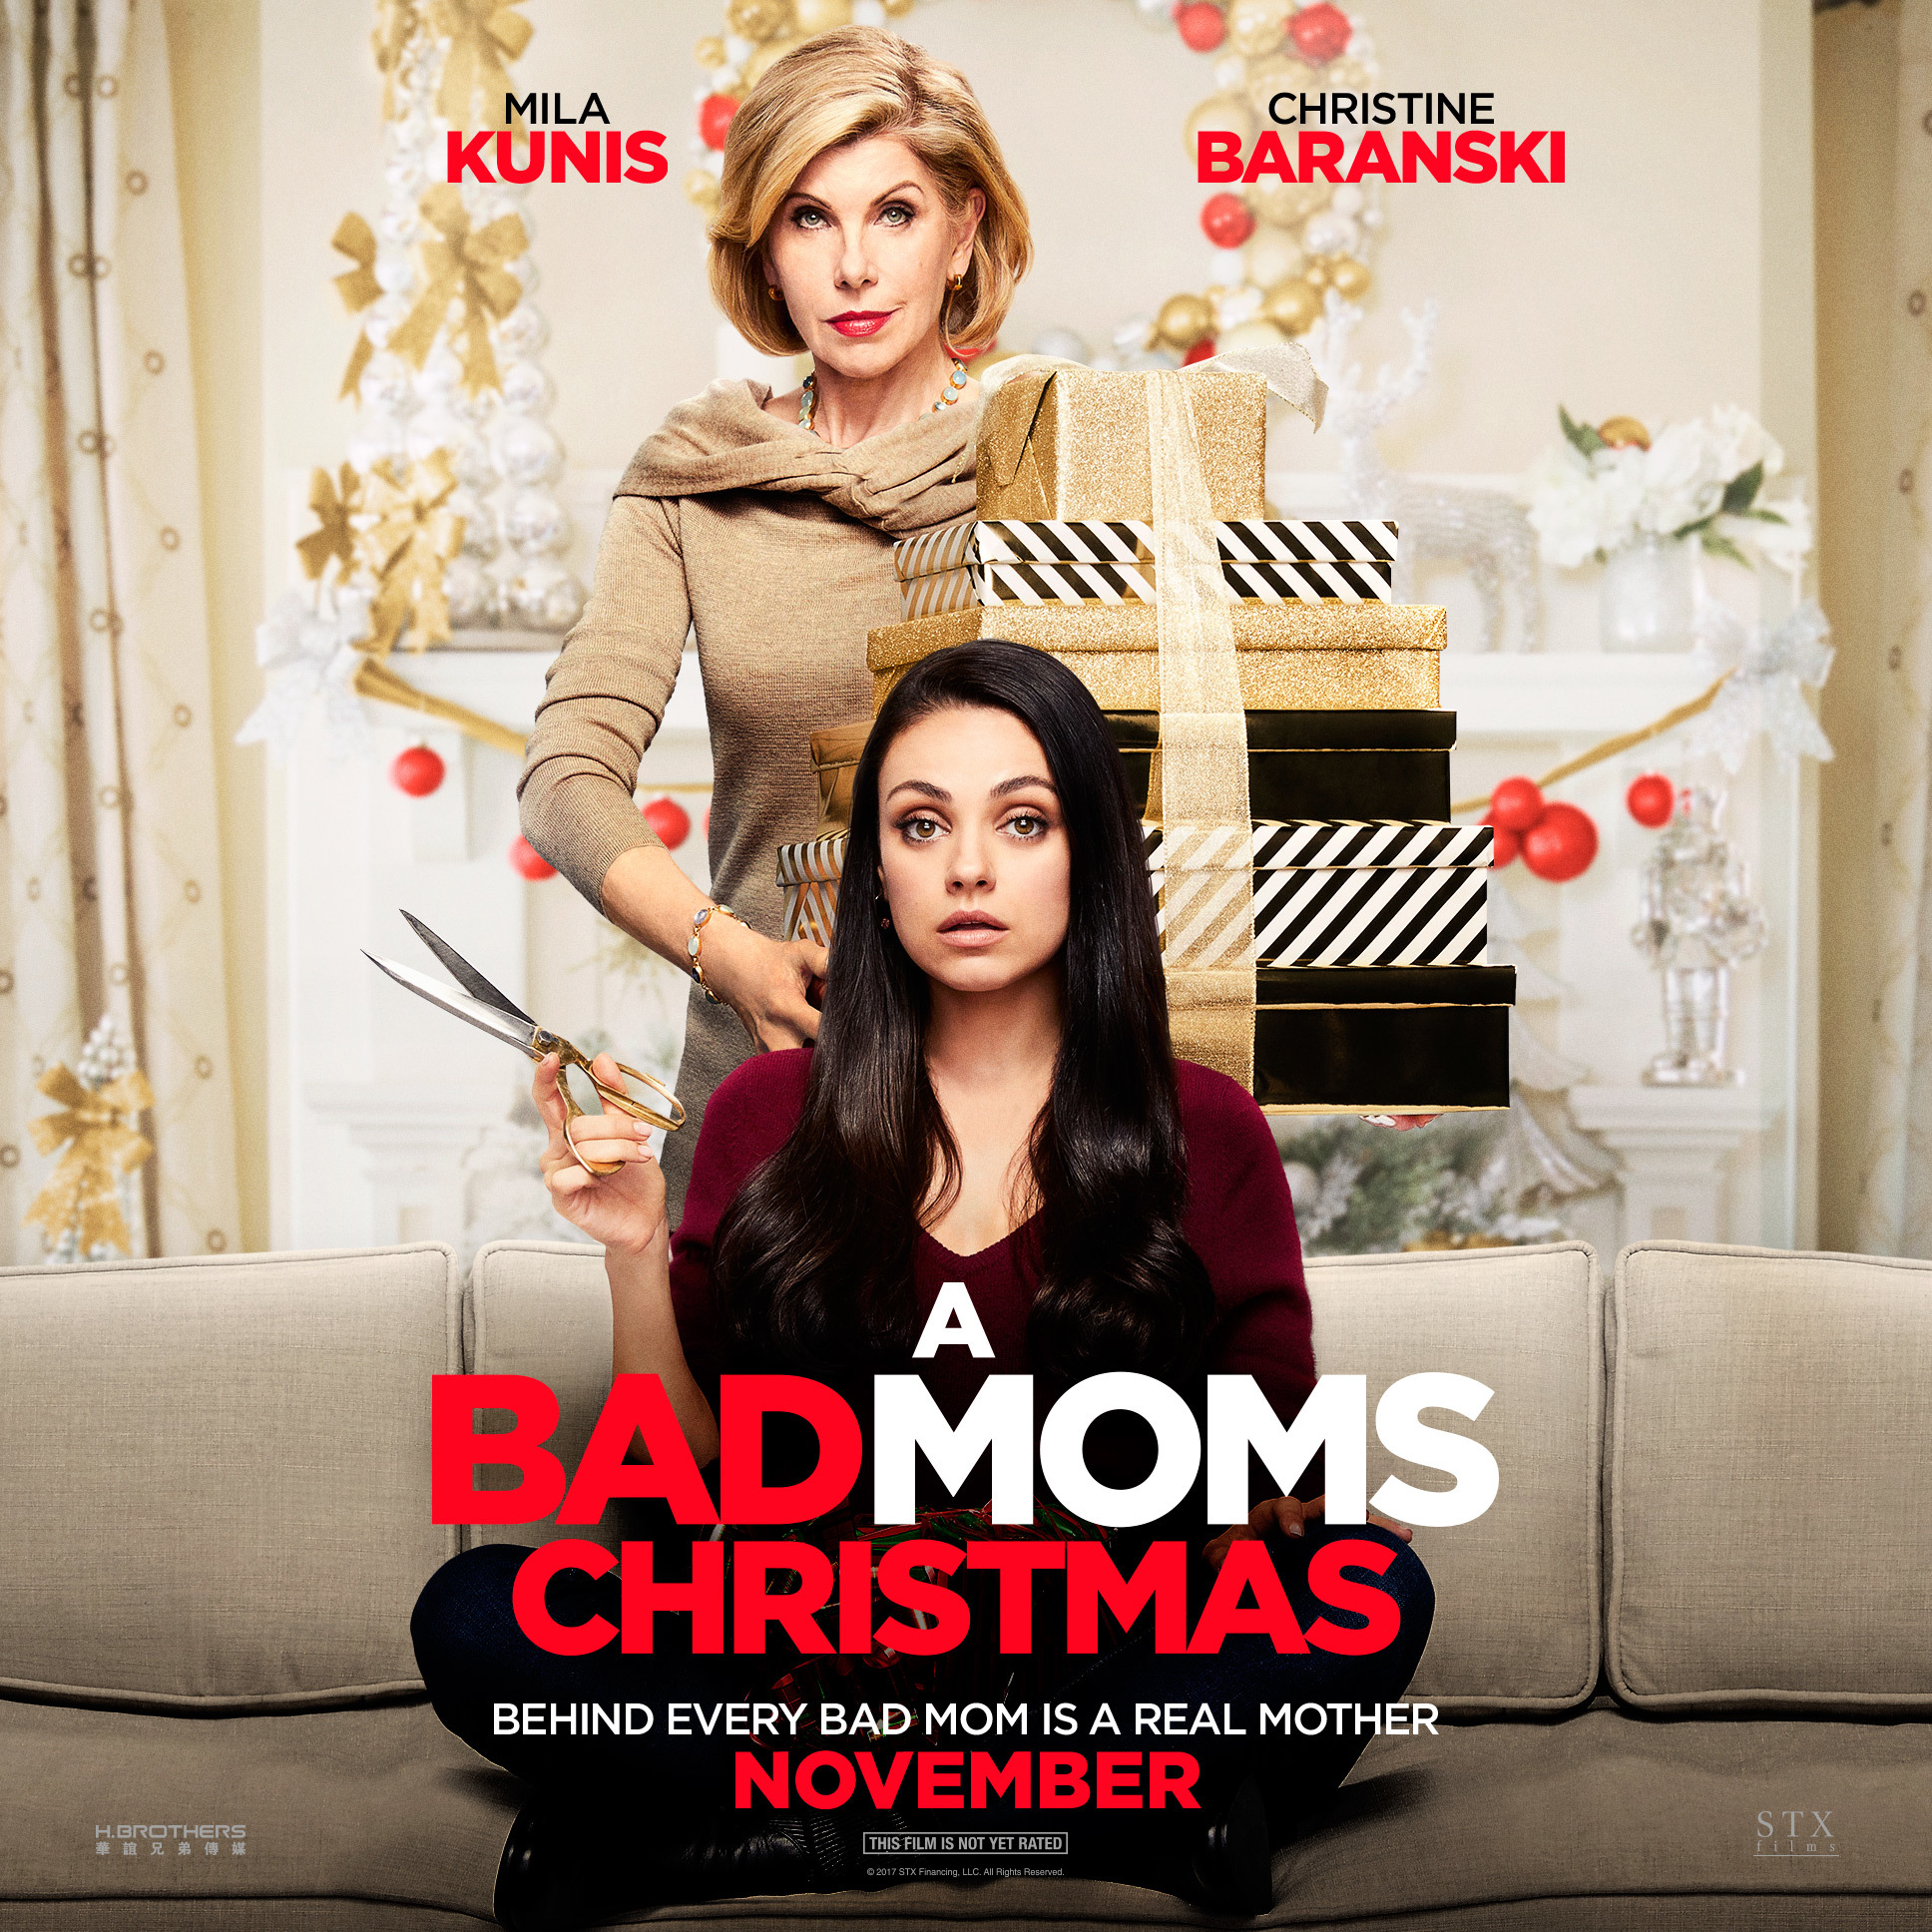 A Bad Moms Christmas In Theaters November 1 A Nation Of Moms